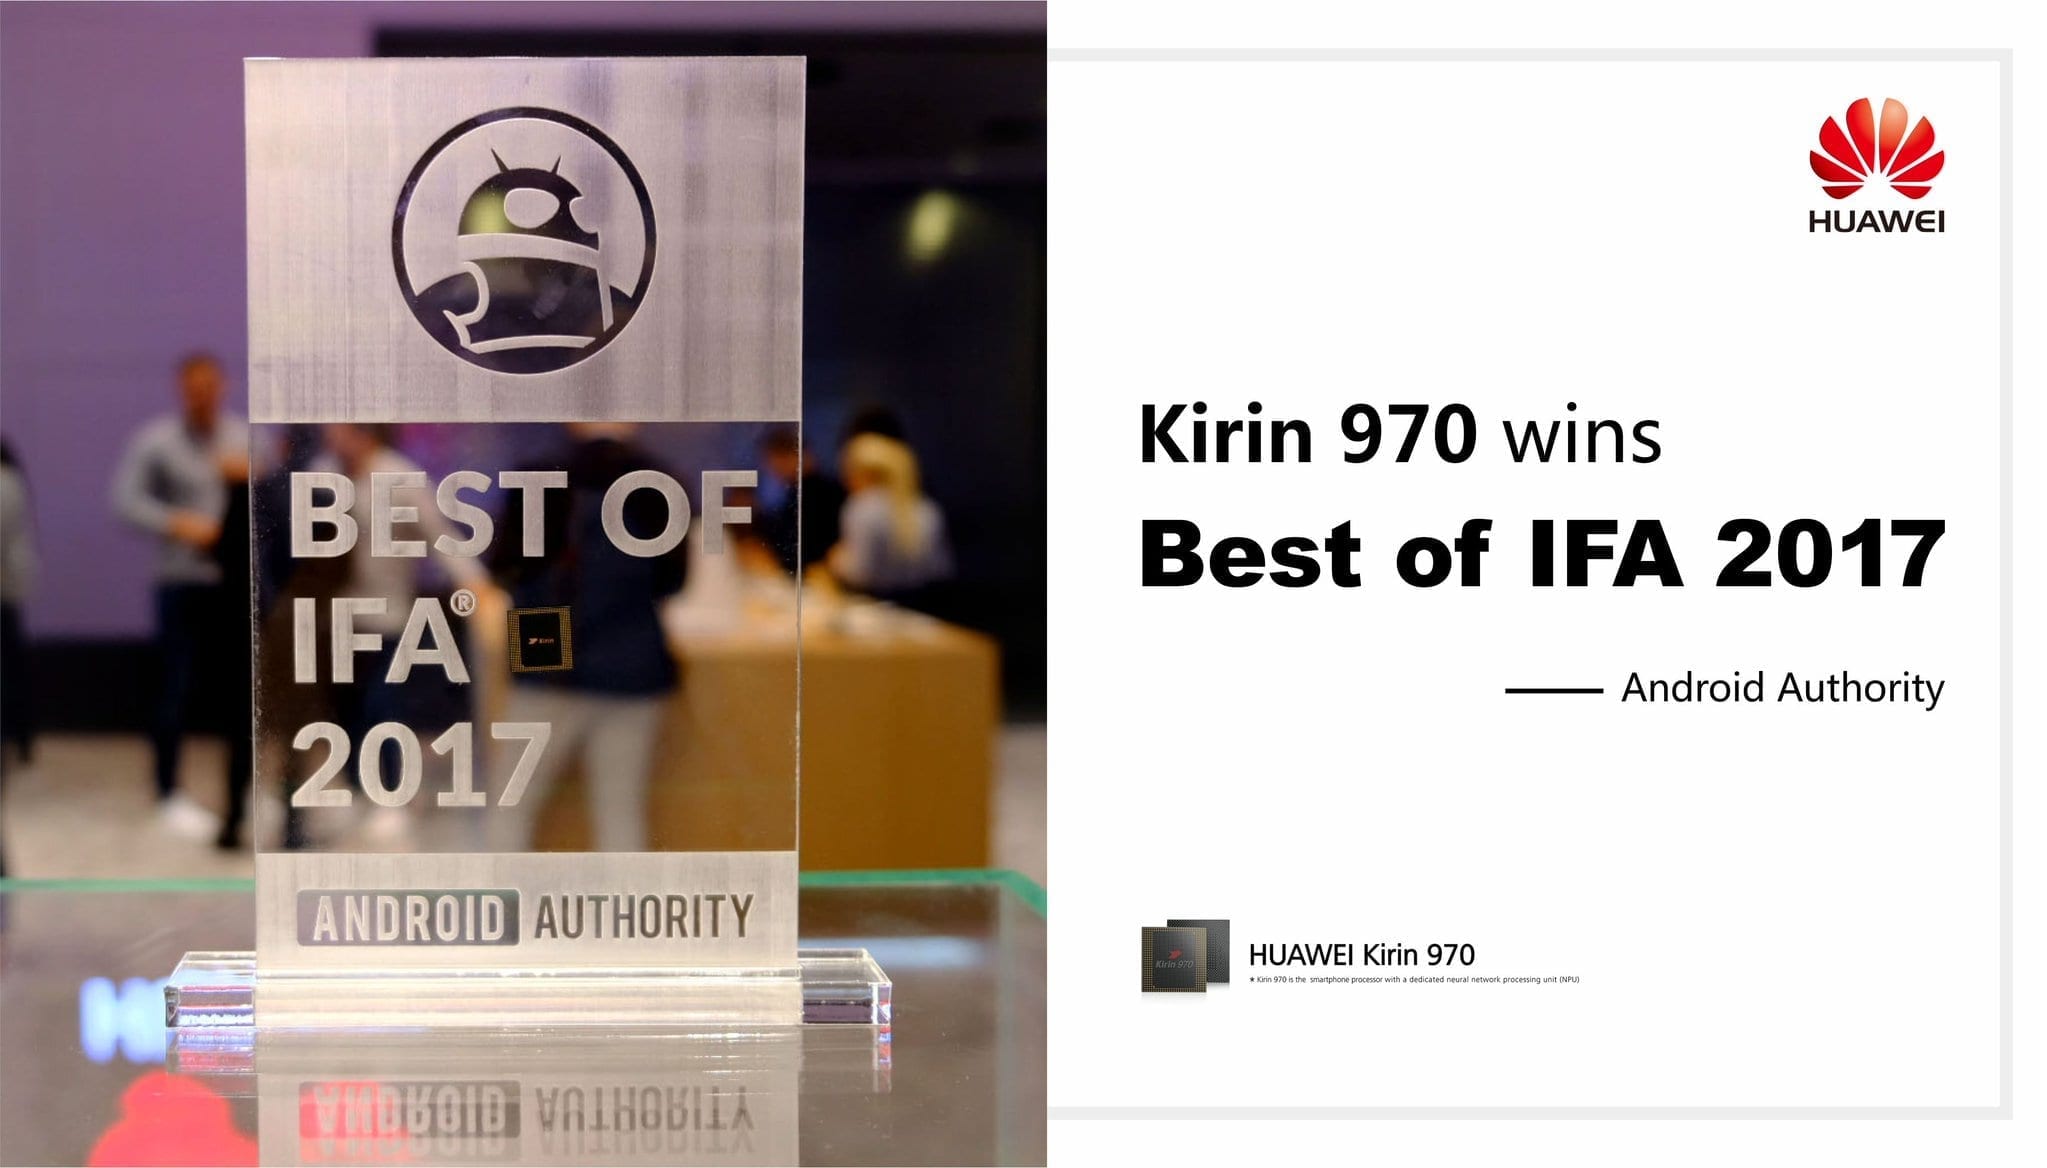 Kirin 970 gets an award by Android Authority at IFA 2017